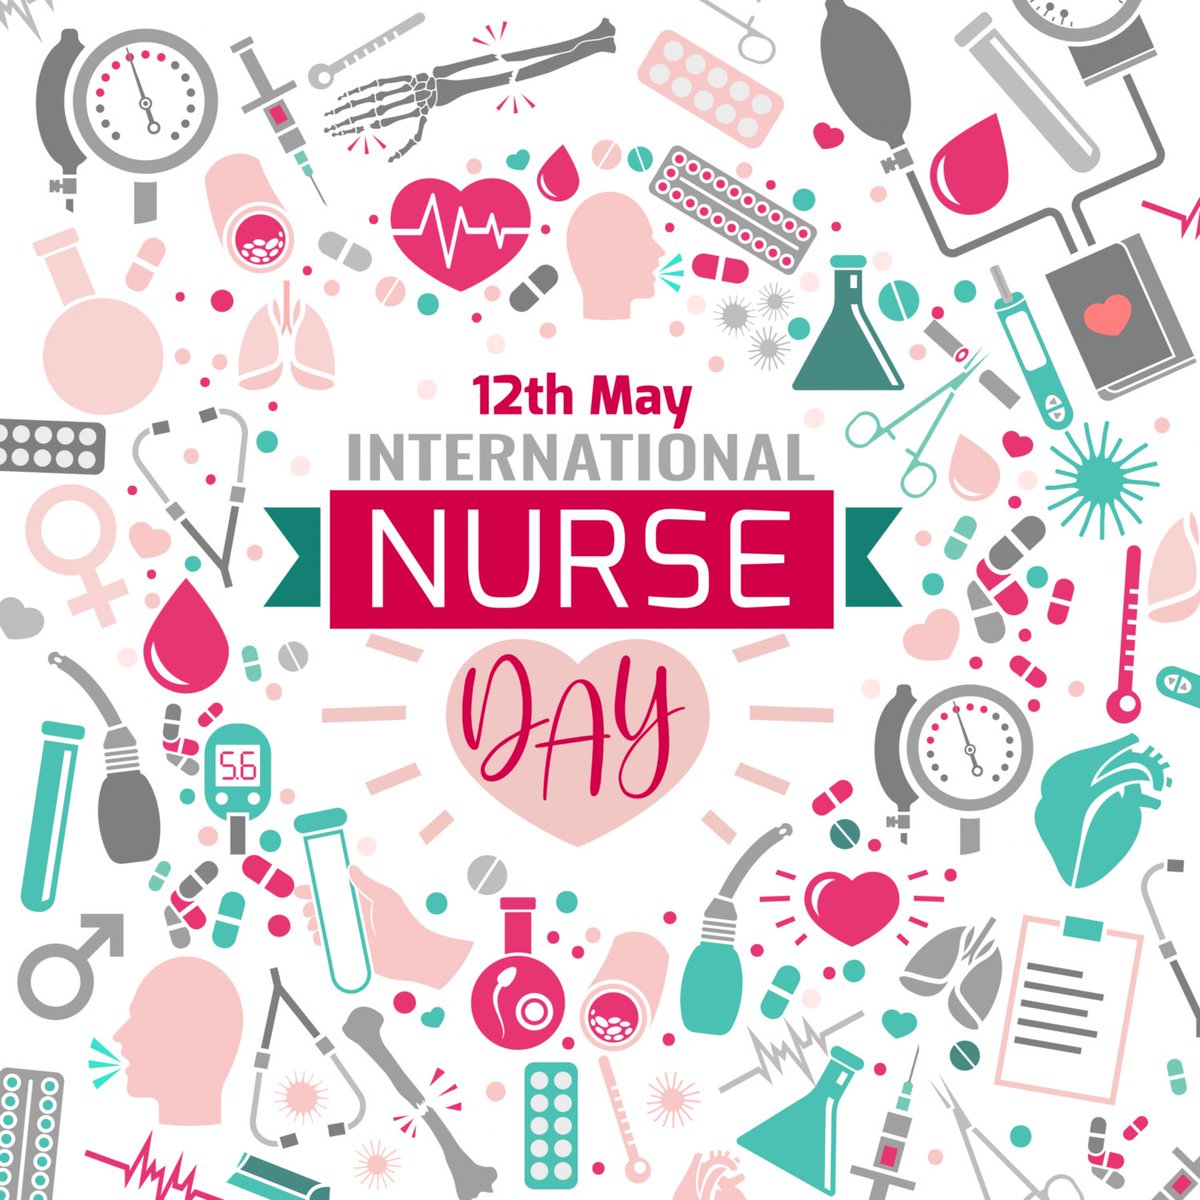 Good morning on #InternationalNursesDay celebrating confident professionalism, curiosity that brings enquiry & progress, passion that advocates for those we care for & the bravery that all of that can take at times of challenge -especially when that is war &/or poverty.